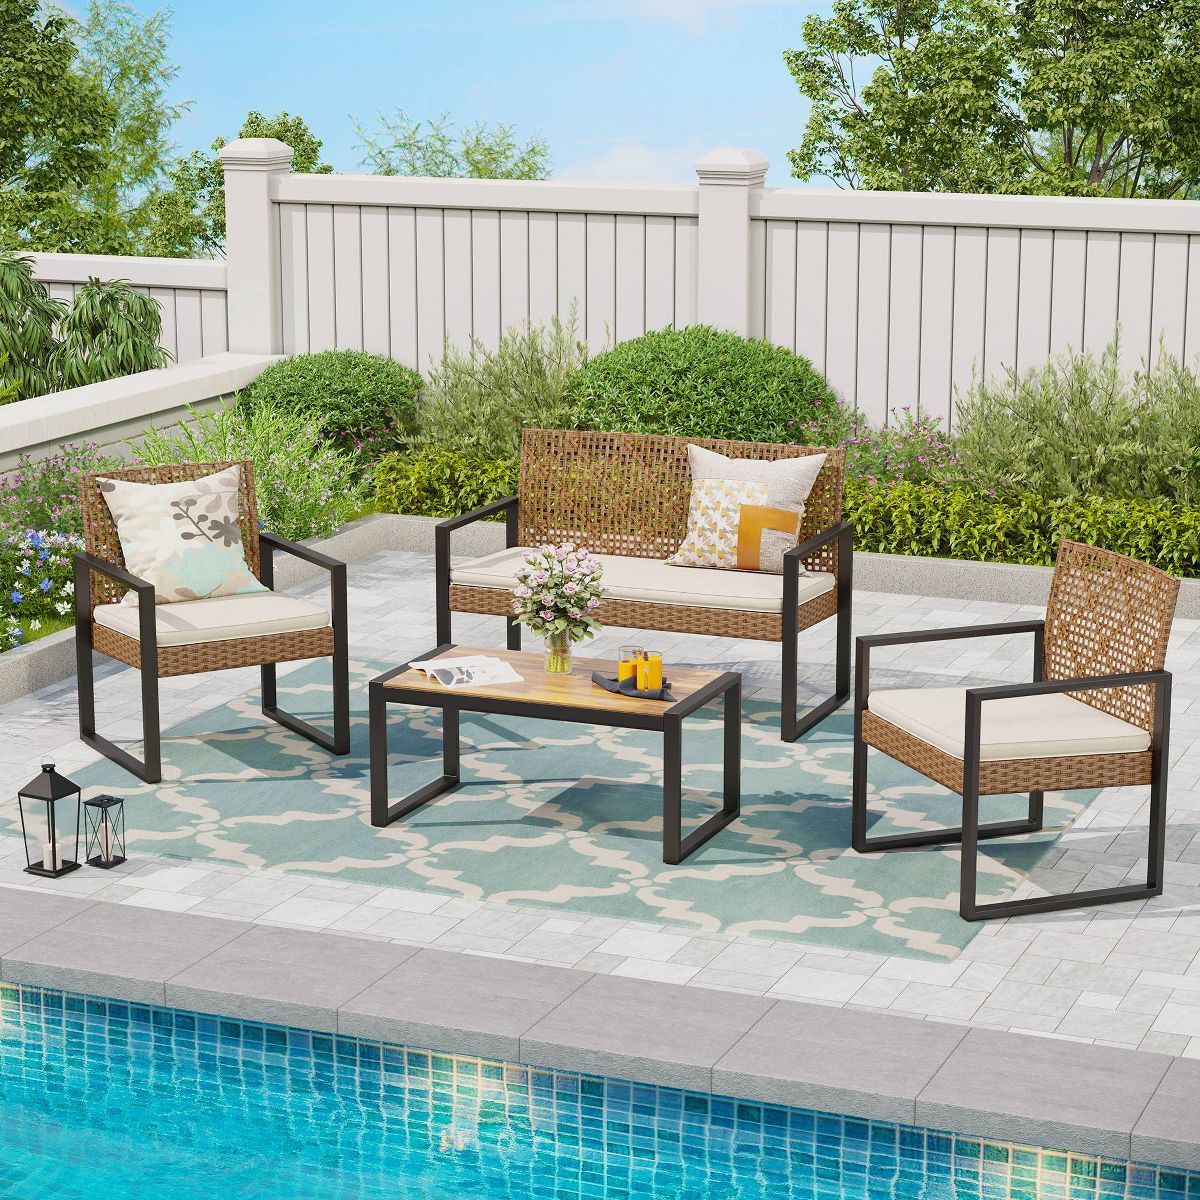 Captiva Designs 4pc Converstaion Set with Armchairs and Coffee Table Wicker Outdoor Patio Seating... | Target